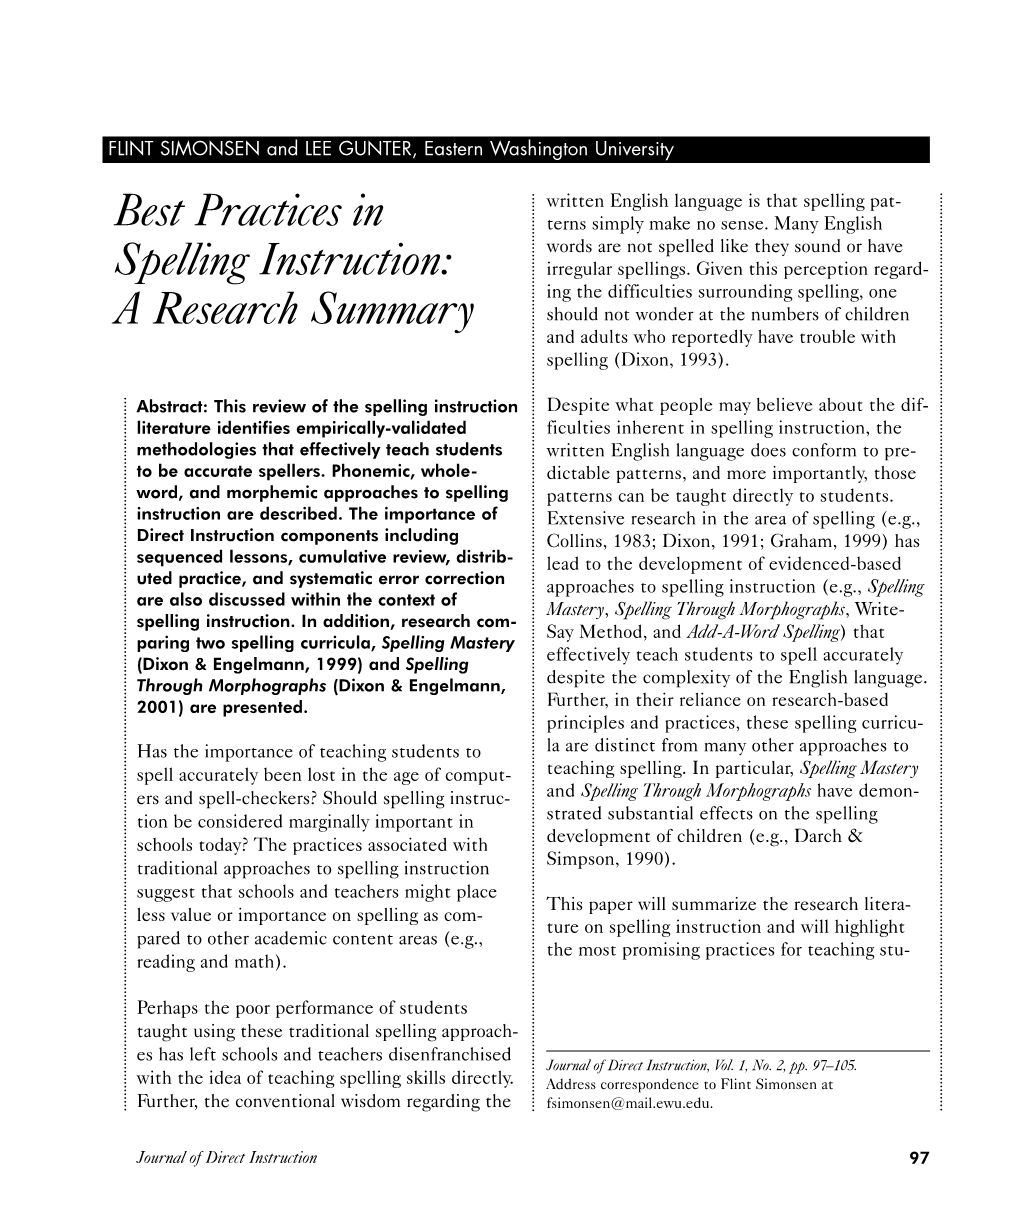 Best Practices in Spelling Instruction: a Research Summary